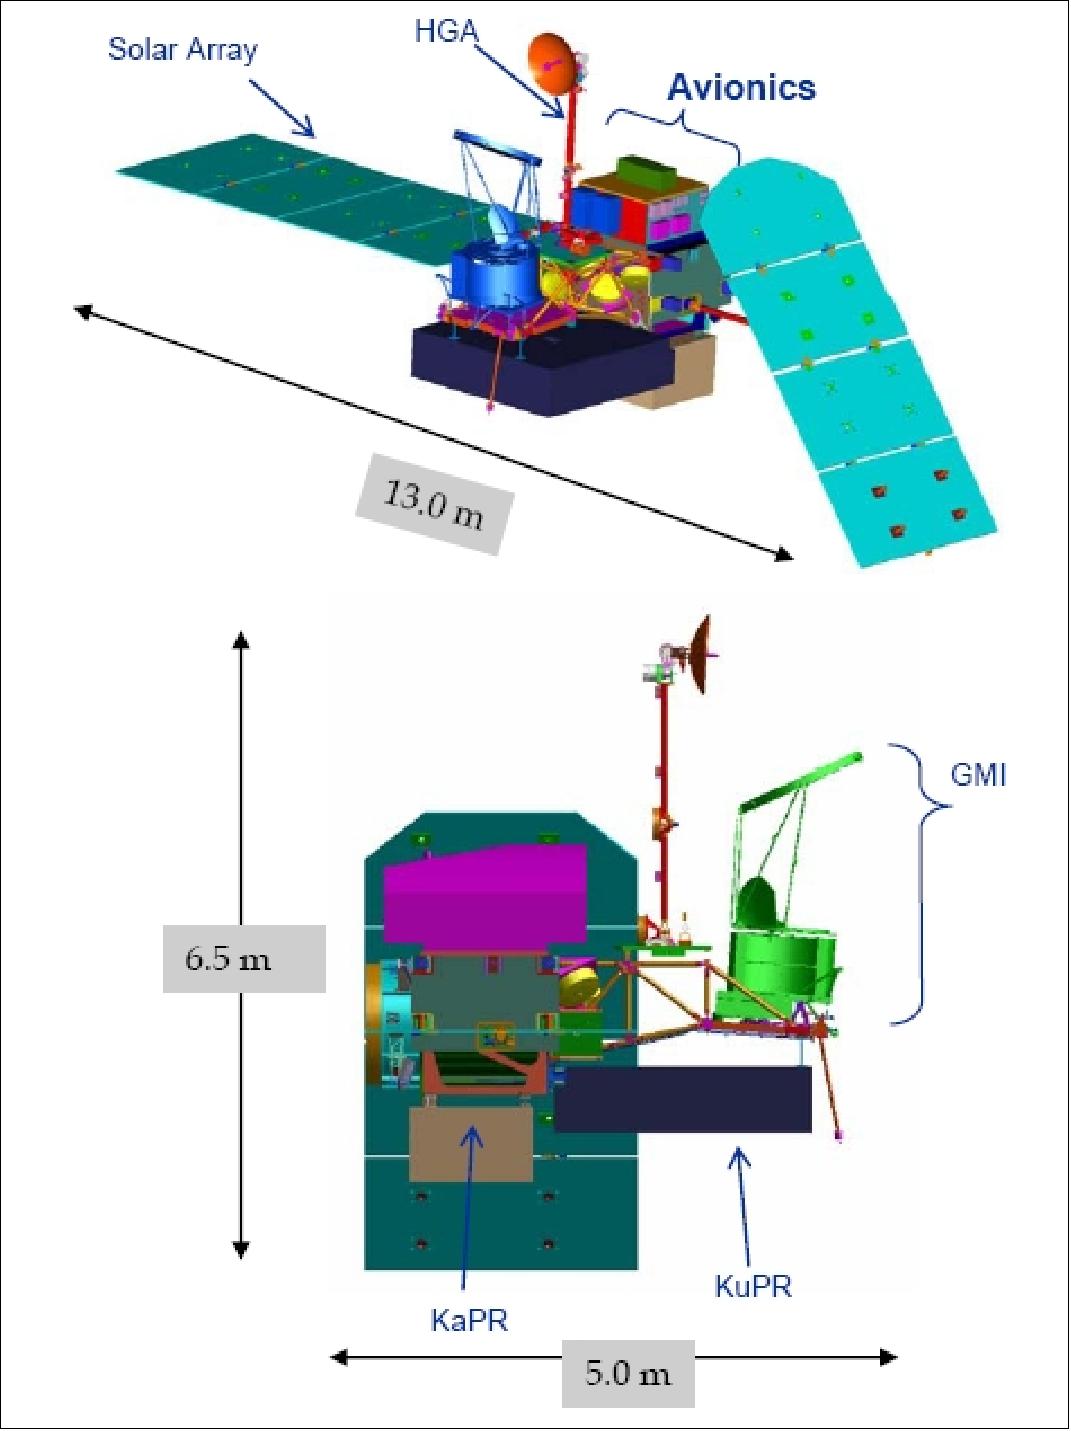 Figure 5: Overview of the GPM Core spacecraft, bottom view shows instrument locations (image credit: NASA)